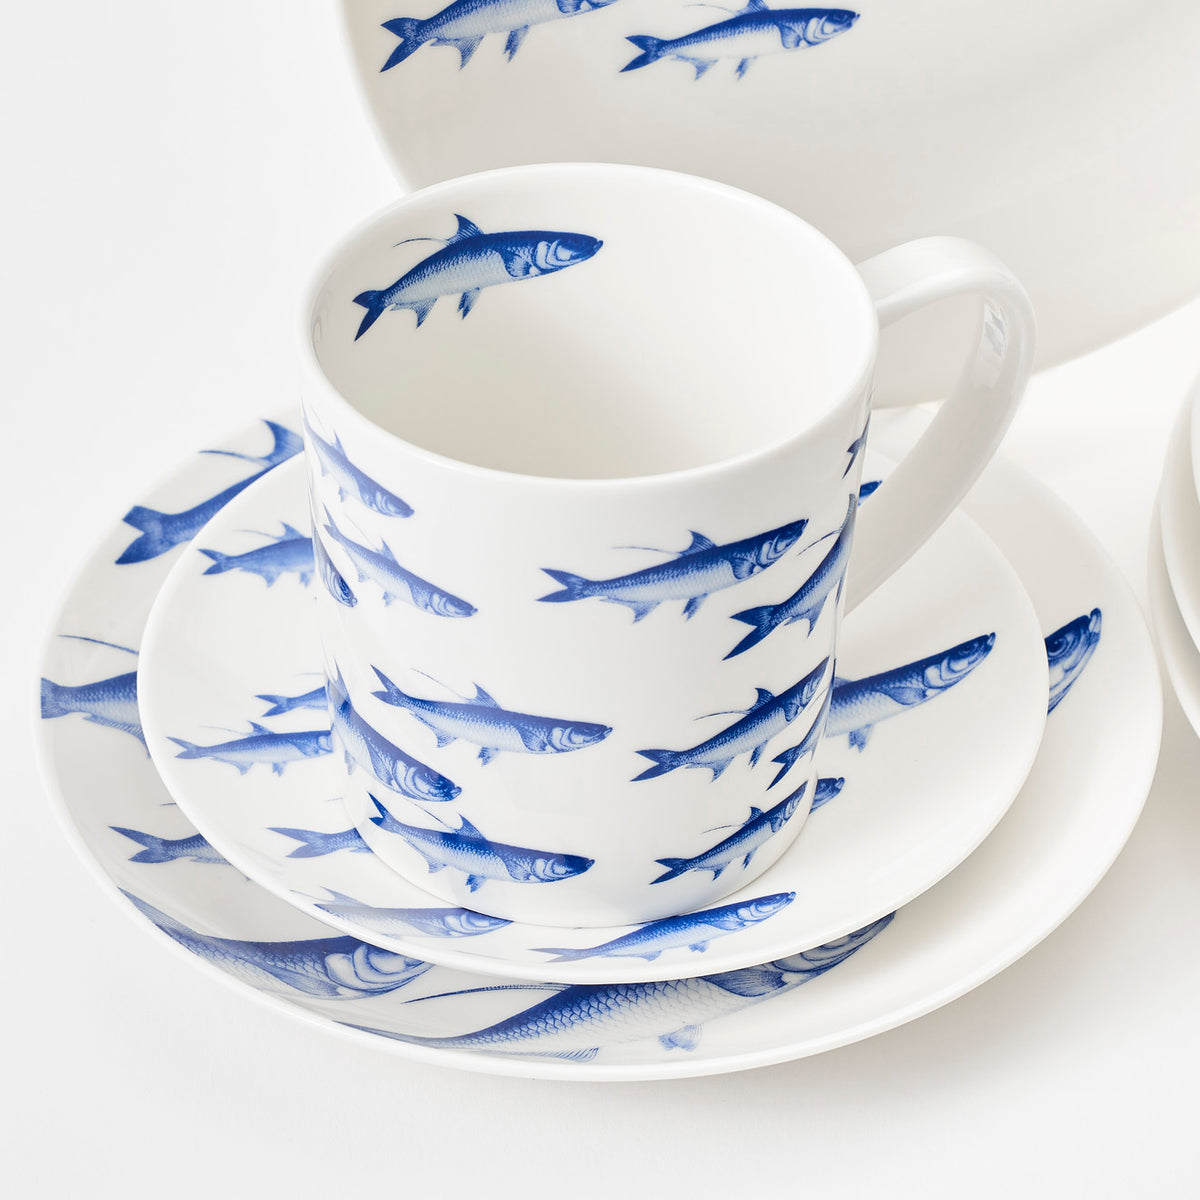 A white ceramic mug, nestled on a saucer, is decorated with blue fish prints. The heirloom-quality dinnerware includes matching plates with similar School of Fish Small Plates by Caskata Artisanal Home partially visible in the background. This microwave-safe set combines durability with timeless charm.